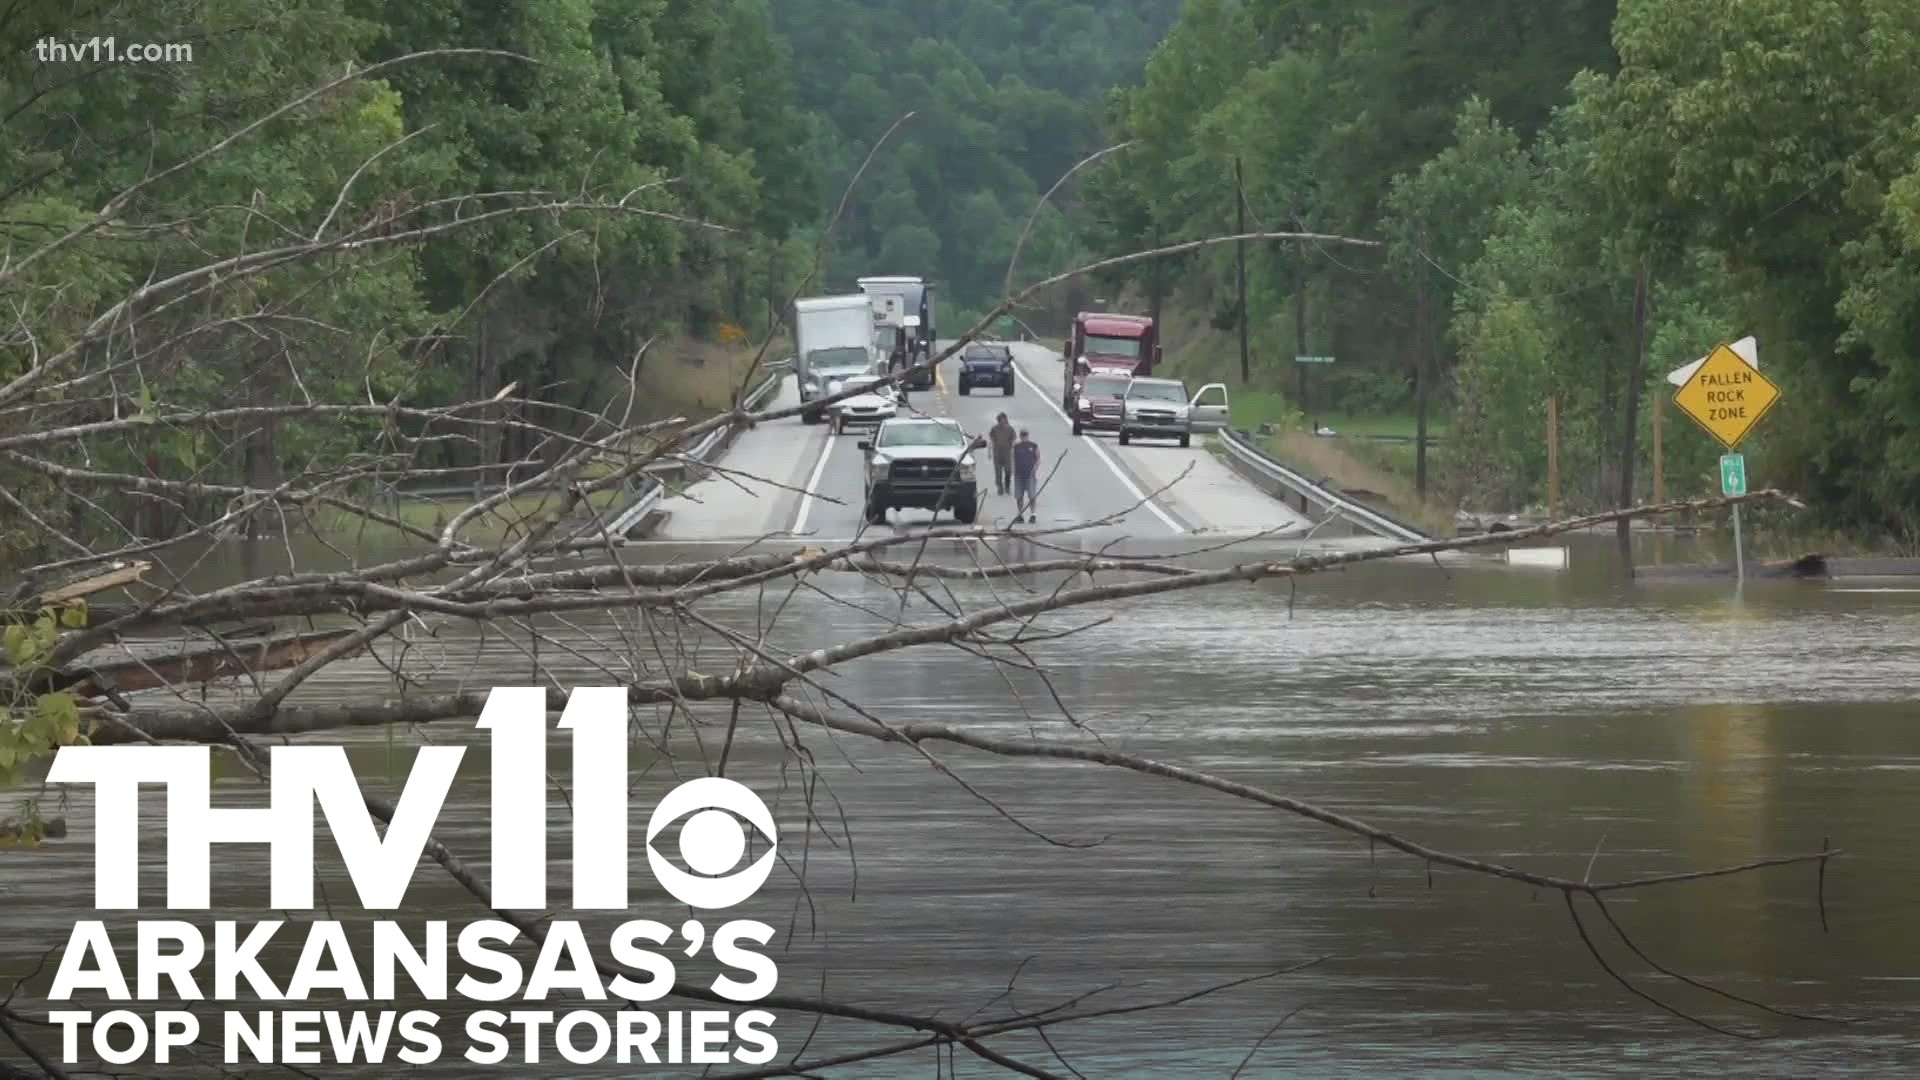 Sarah Horbacewicz delivers the top news stories for July 31, 2022, including the latest on deadly flash floods that left entire neighborhoods under water in Kentucky